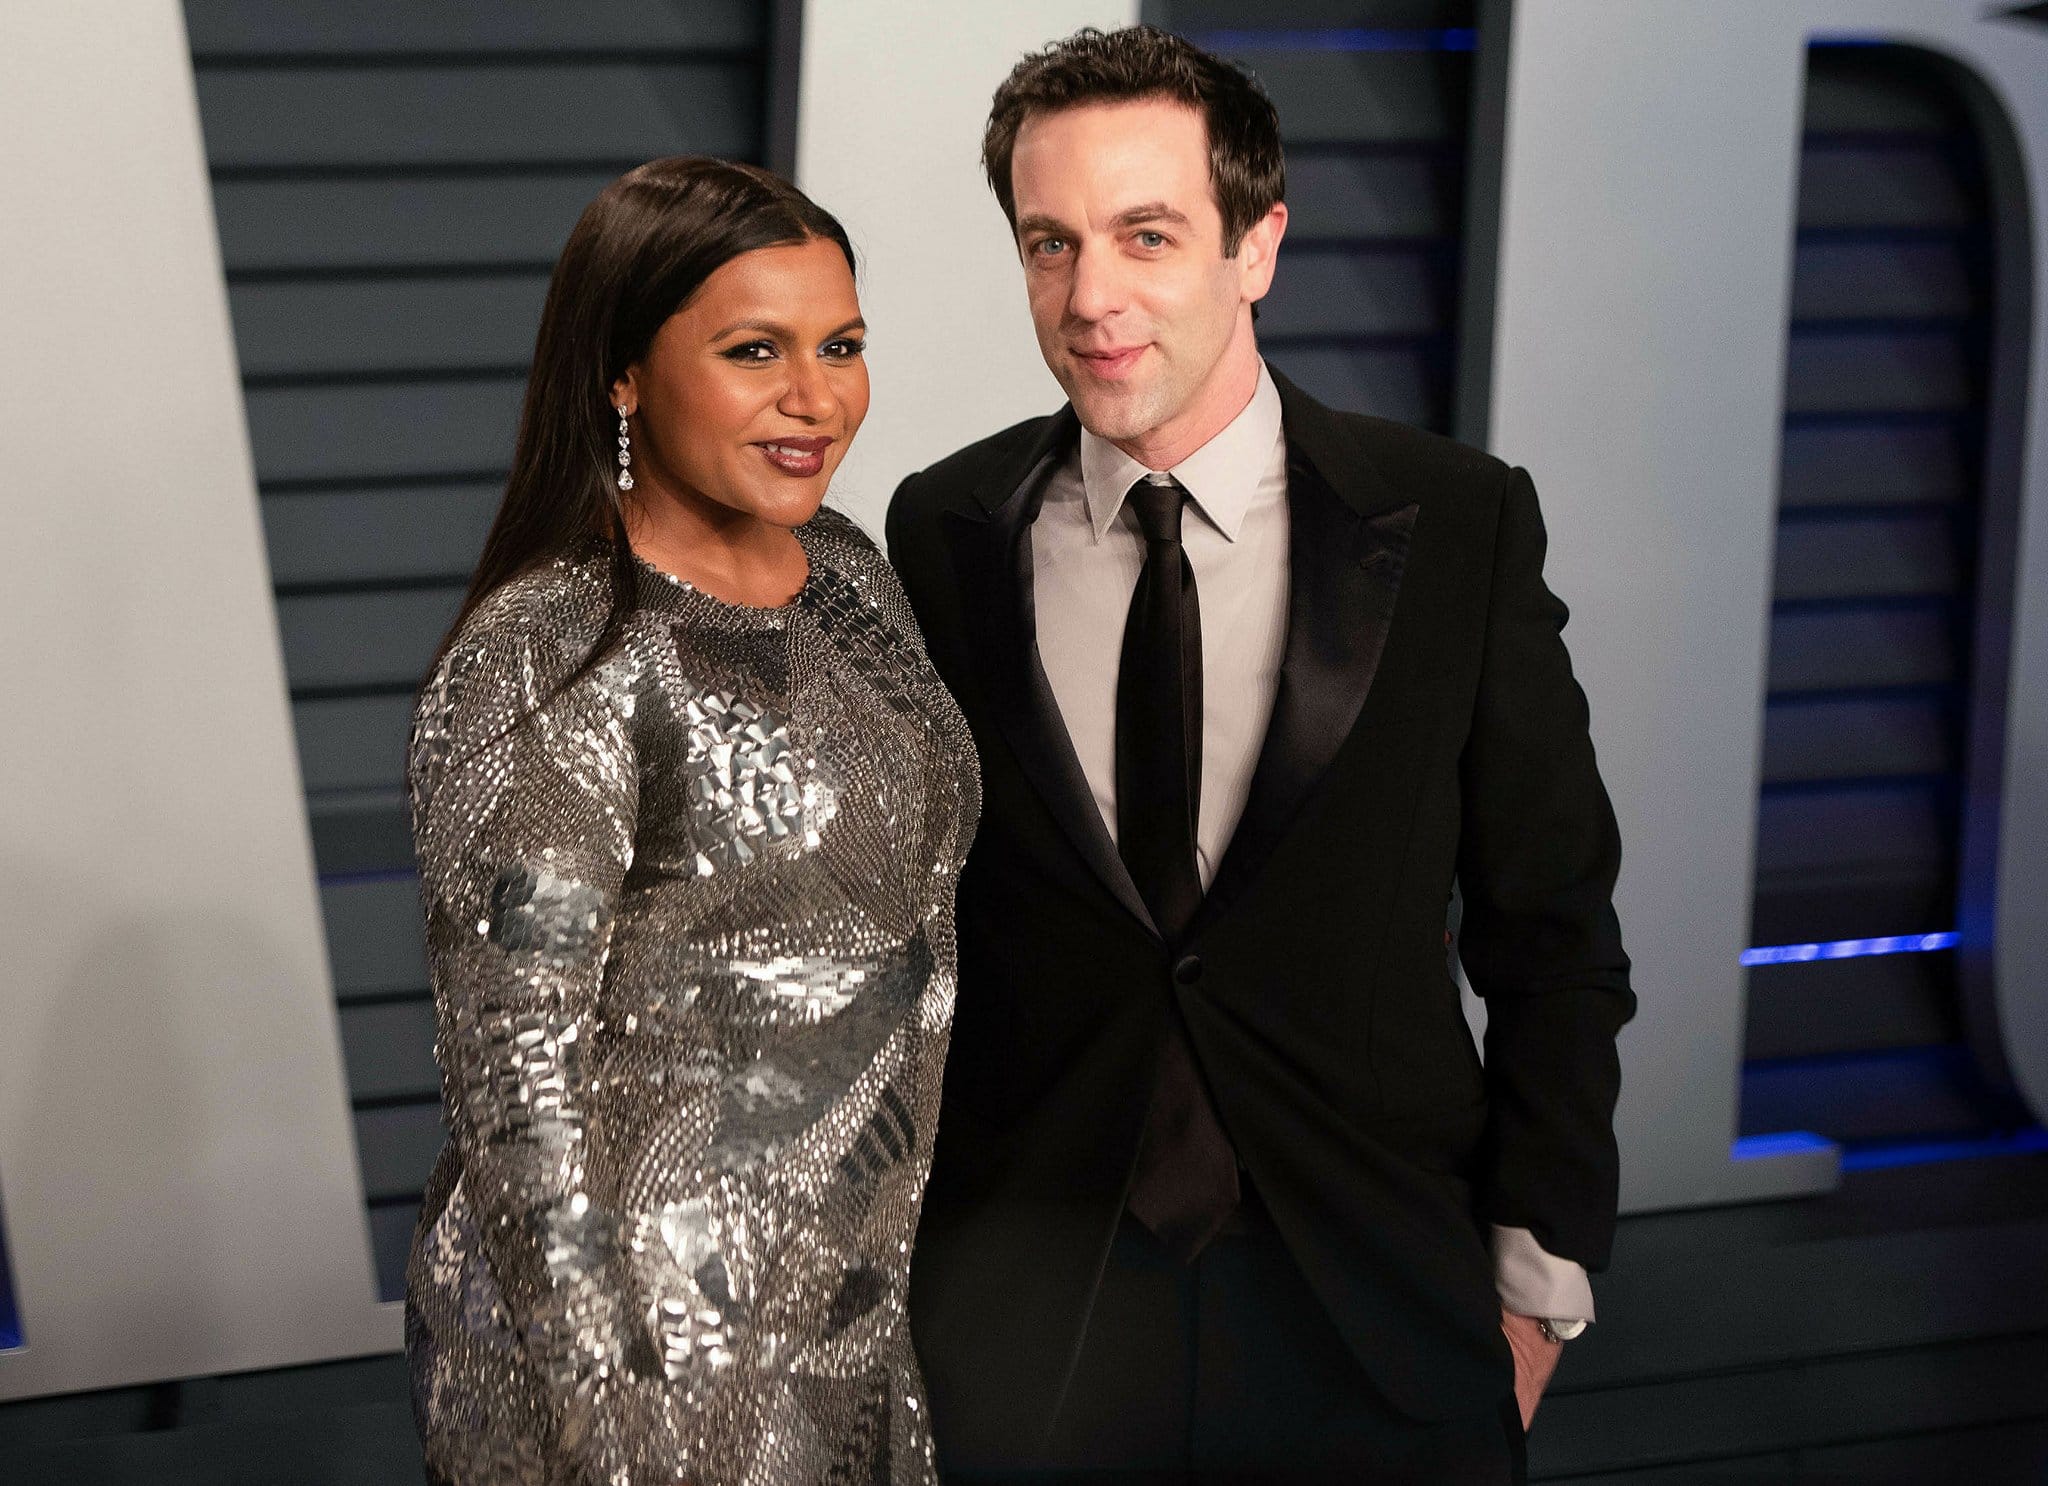 Mindy Kaling and B.J. Novak pictured together at the 2019 Vanity Fair Oscar party